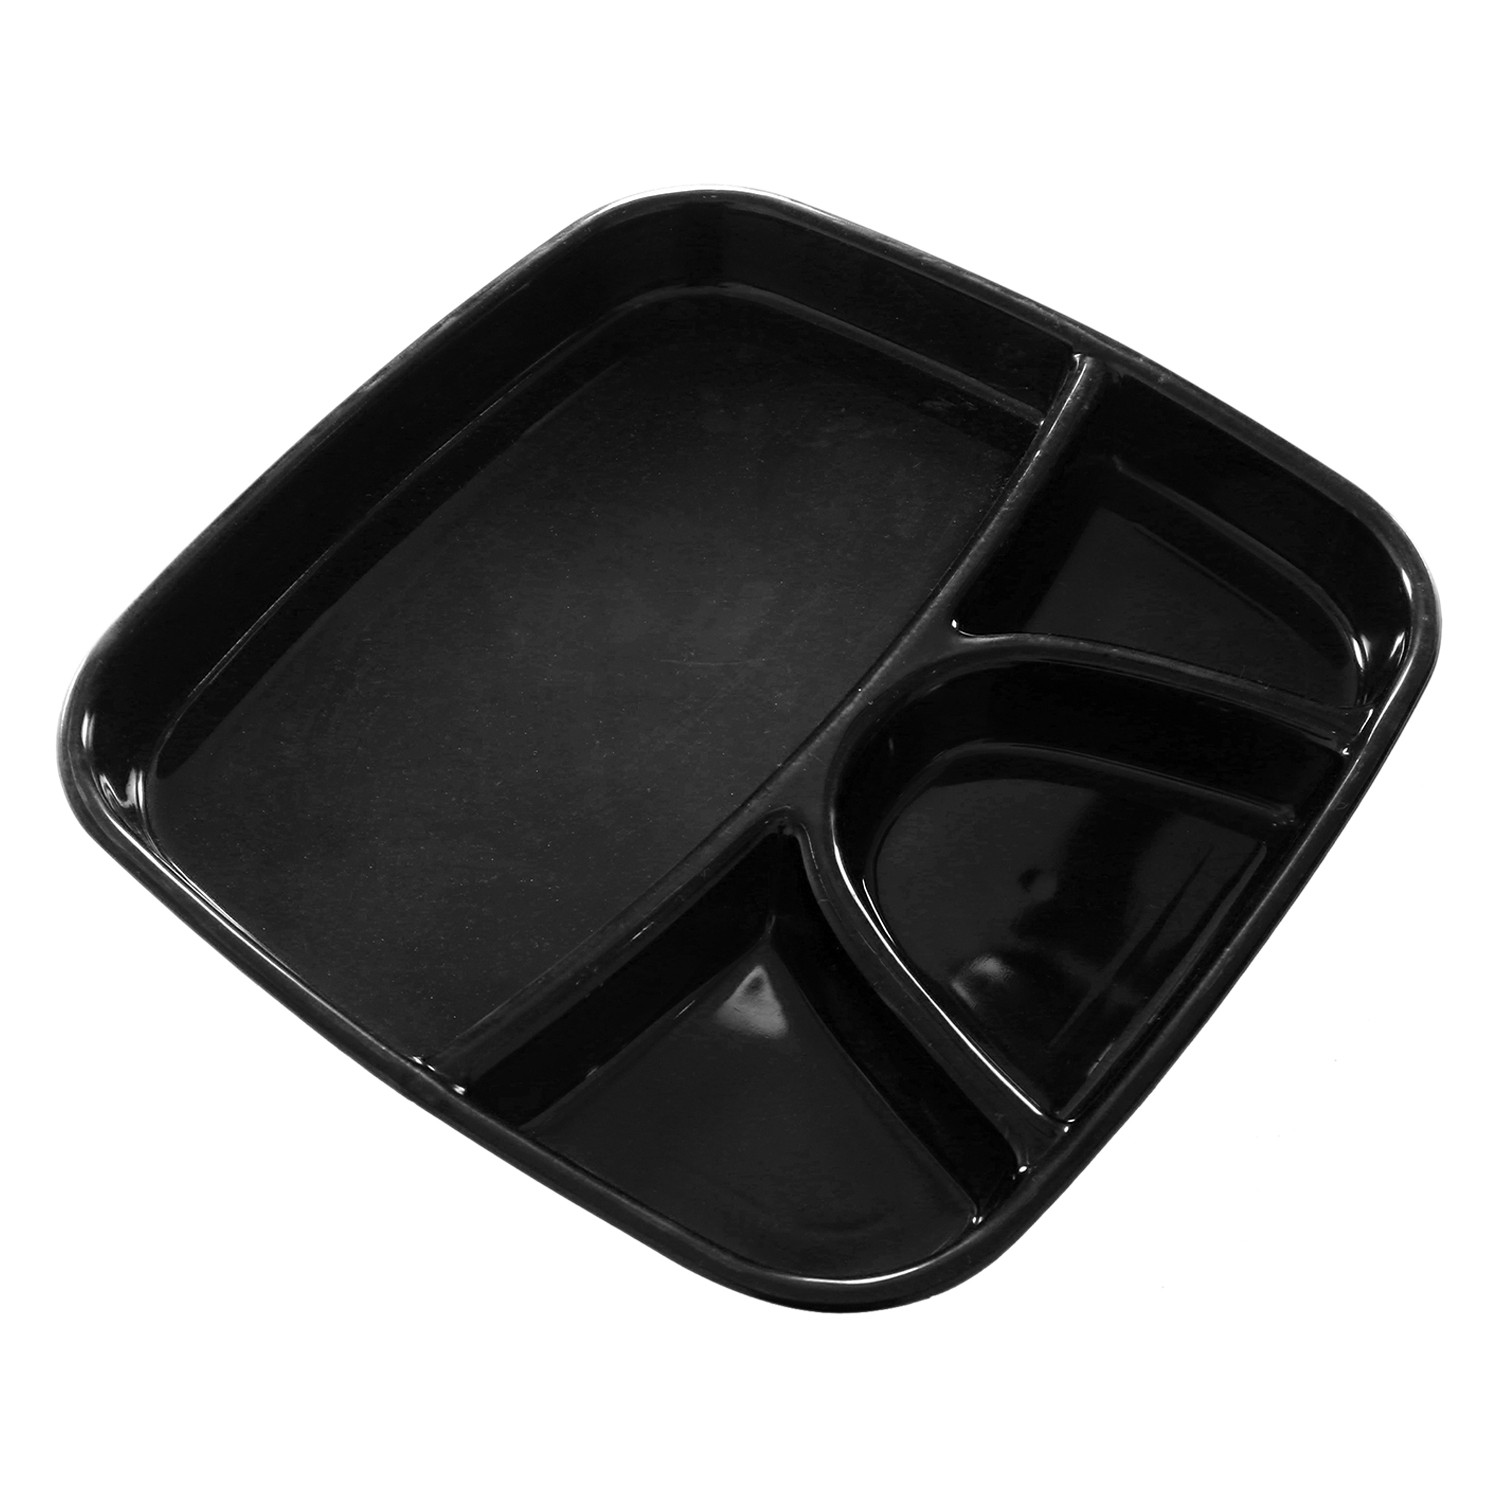 Kuber Industries Serving Plate|Plate Set For Dinner|Unbreakable Plastic Plates|Microwave Safe Plates|Food Organizer With 4 Partitions|(Black)